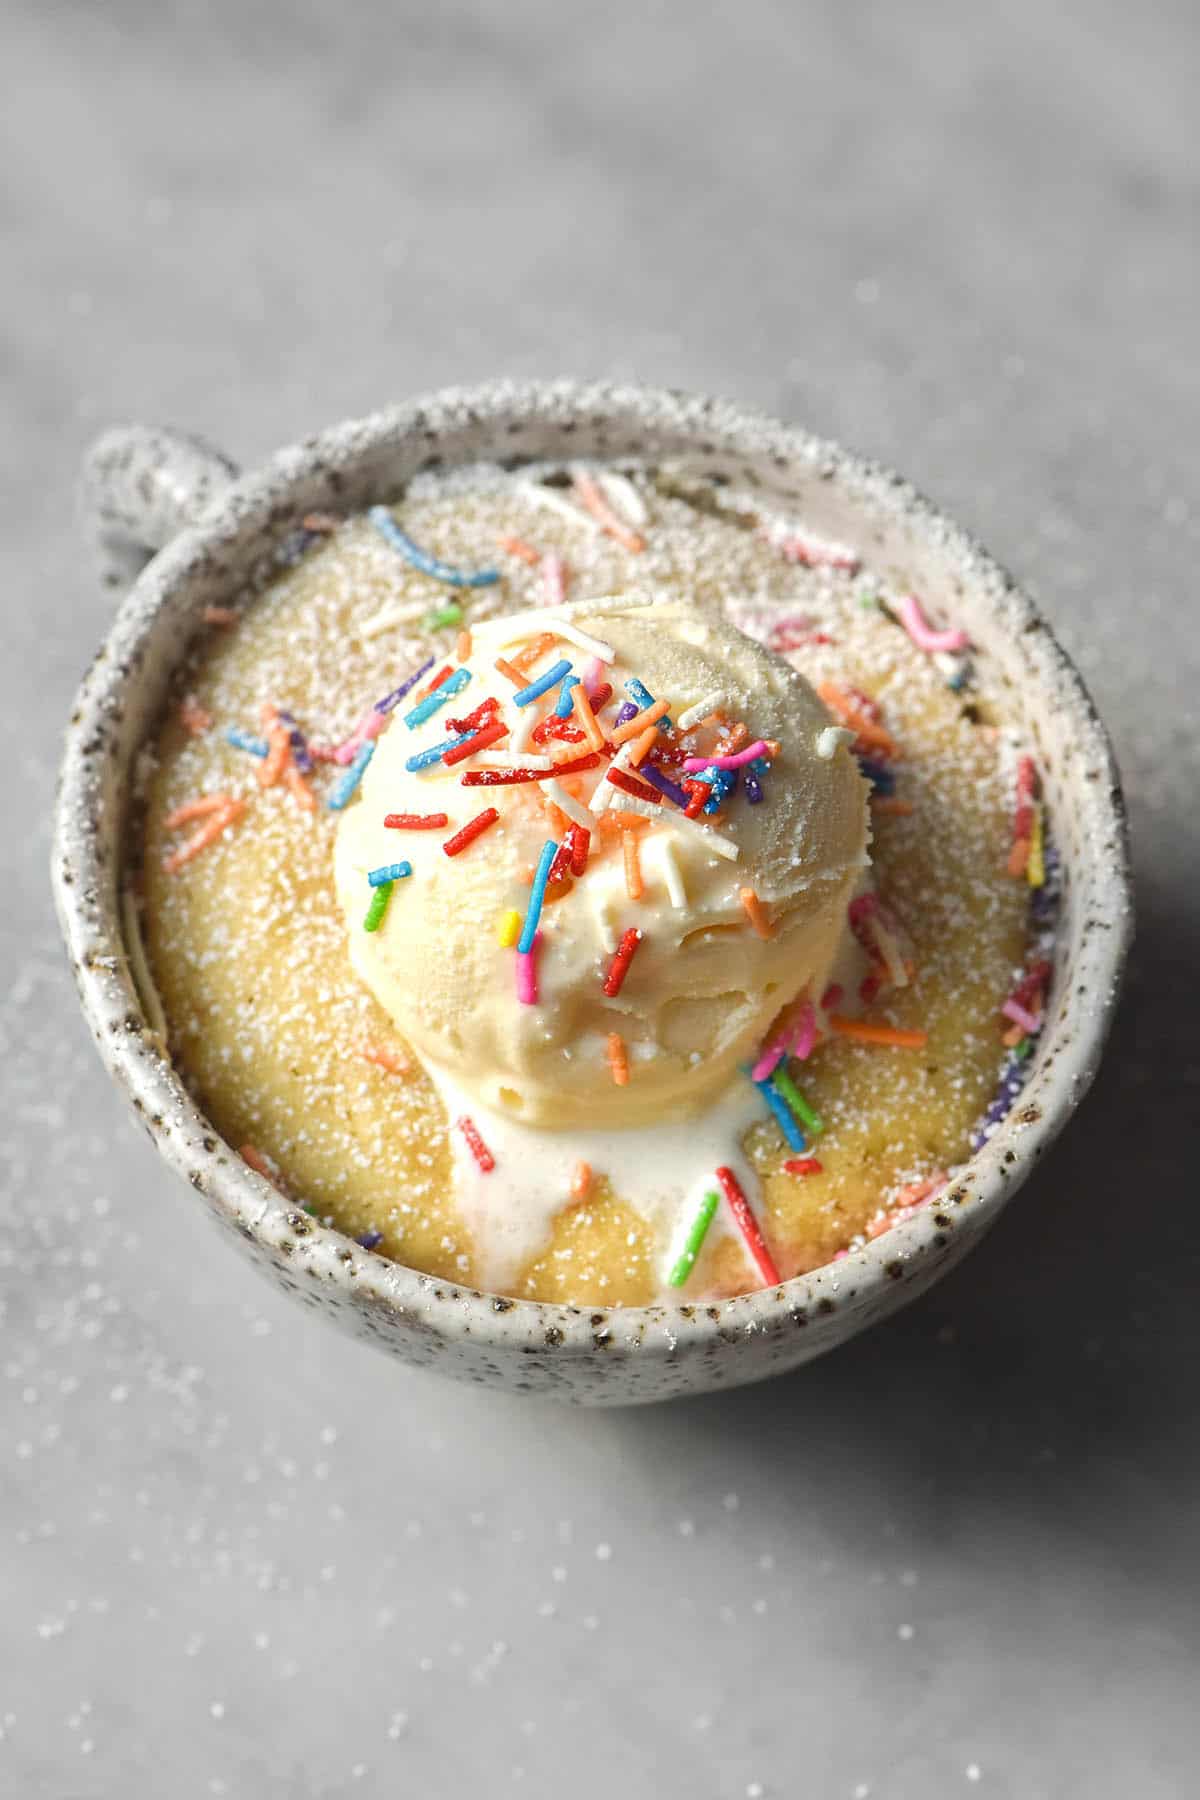 An aerial image of a gluten free vanilla mug cake topped with vanilla ice cream and rainbow sprinkles. The mug cake is in a white speckled ceramic mug on a white marble table